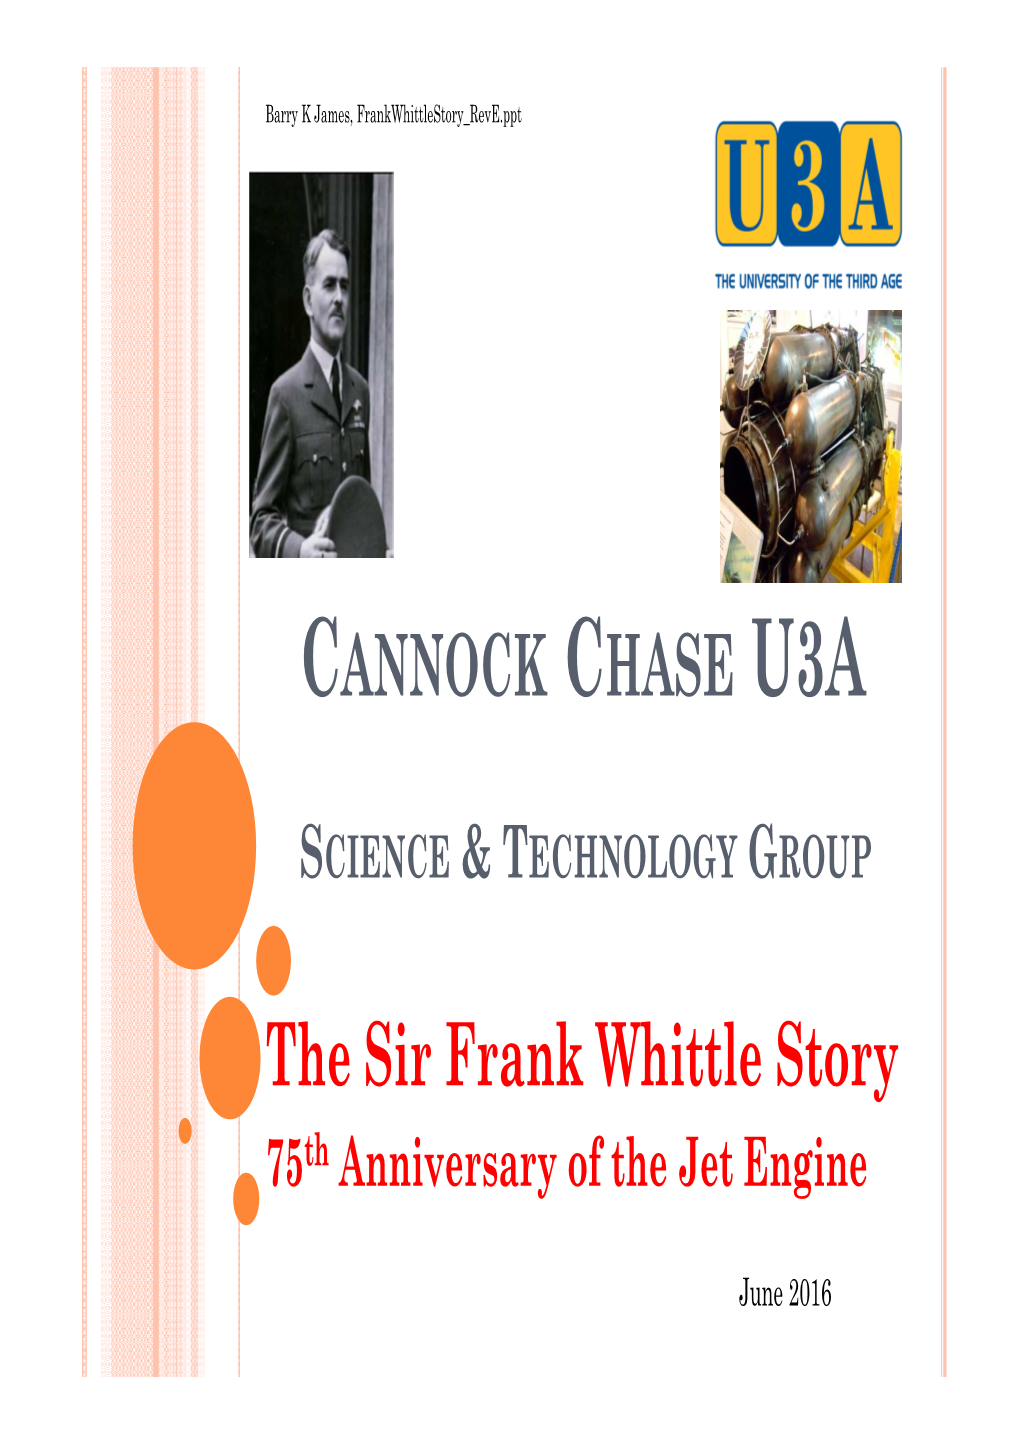 The Sir Frank Whittle Story 75 Th Anniversary of the Jet Engine